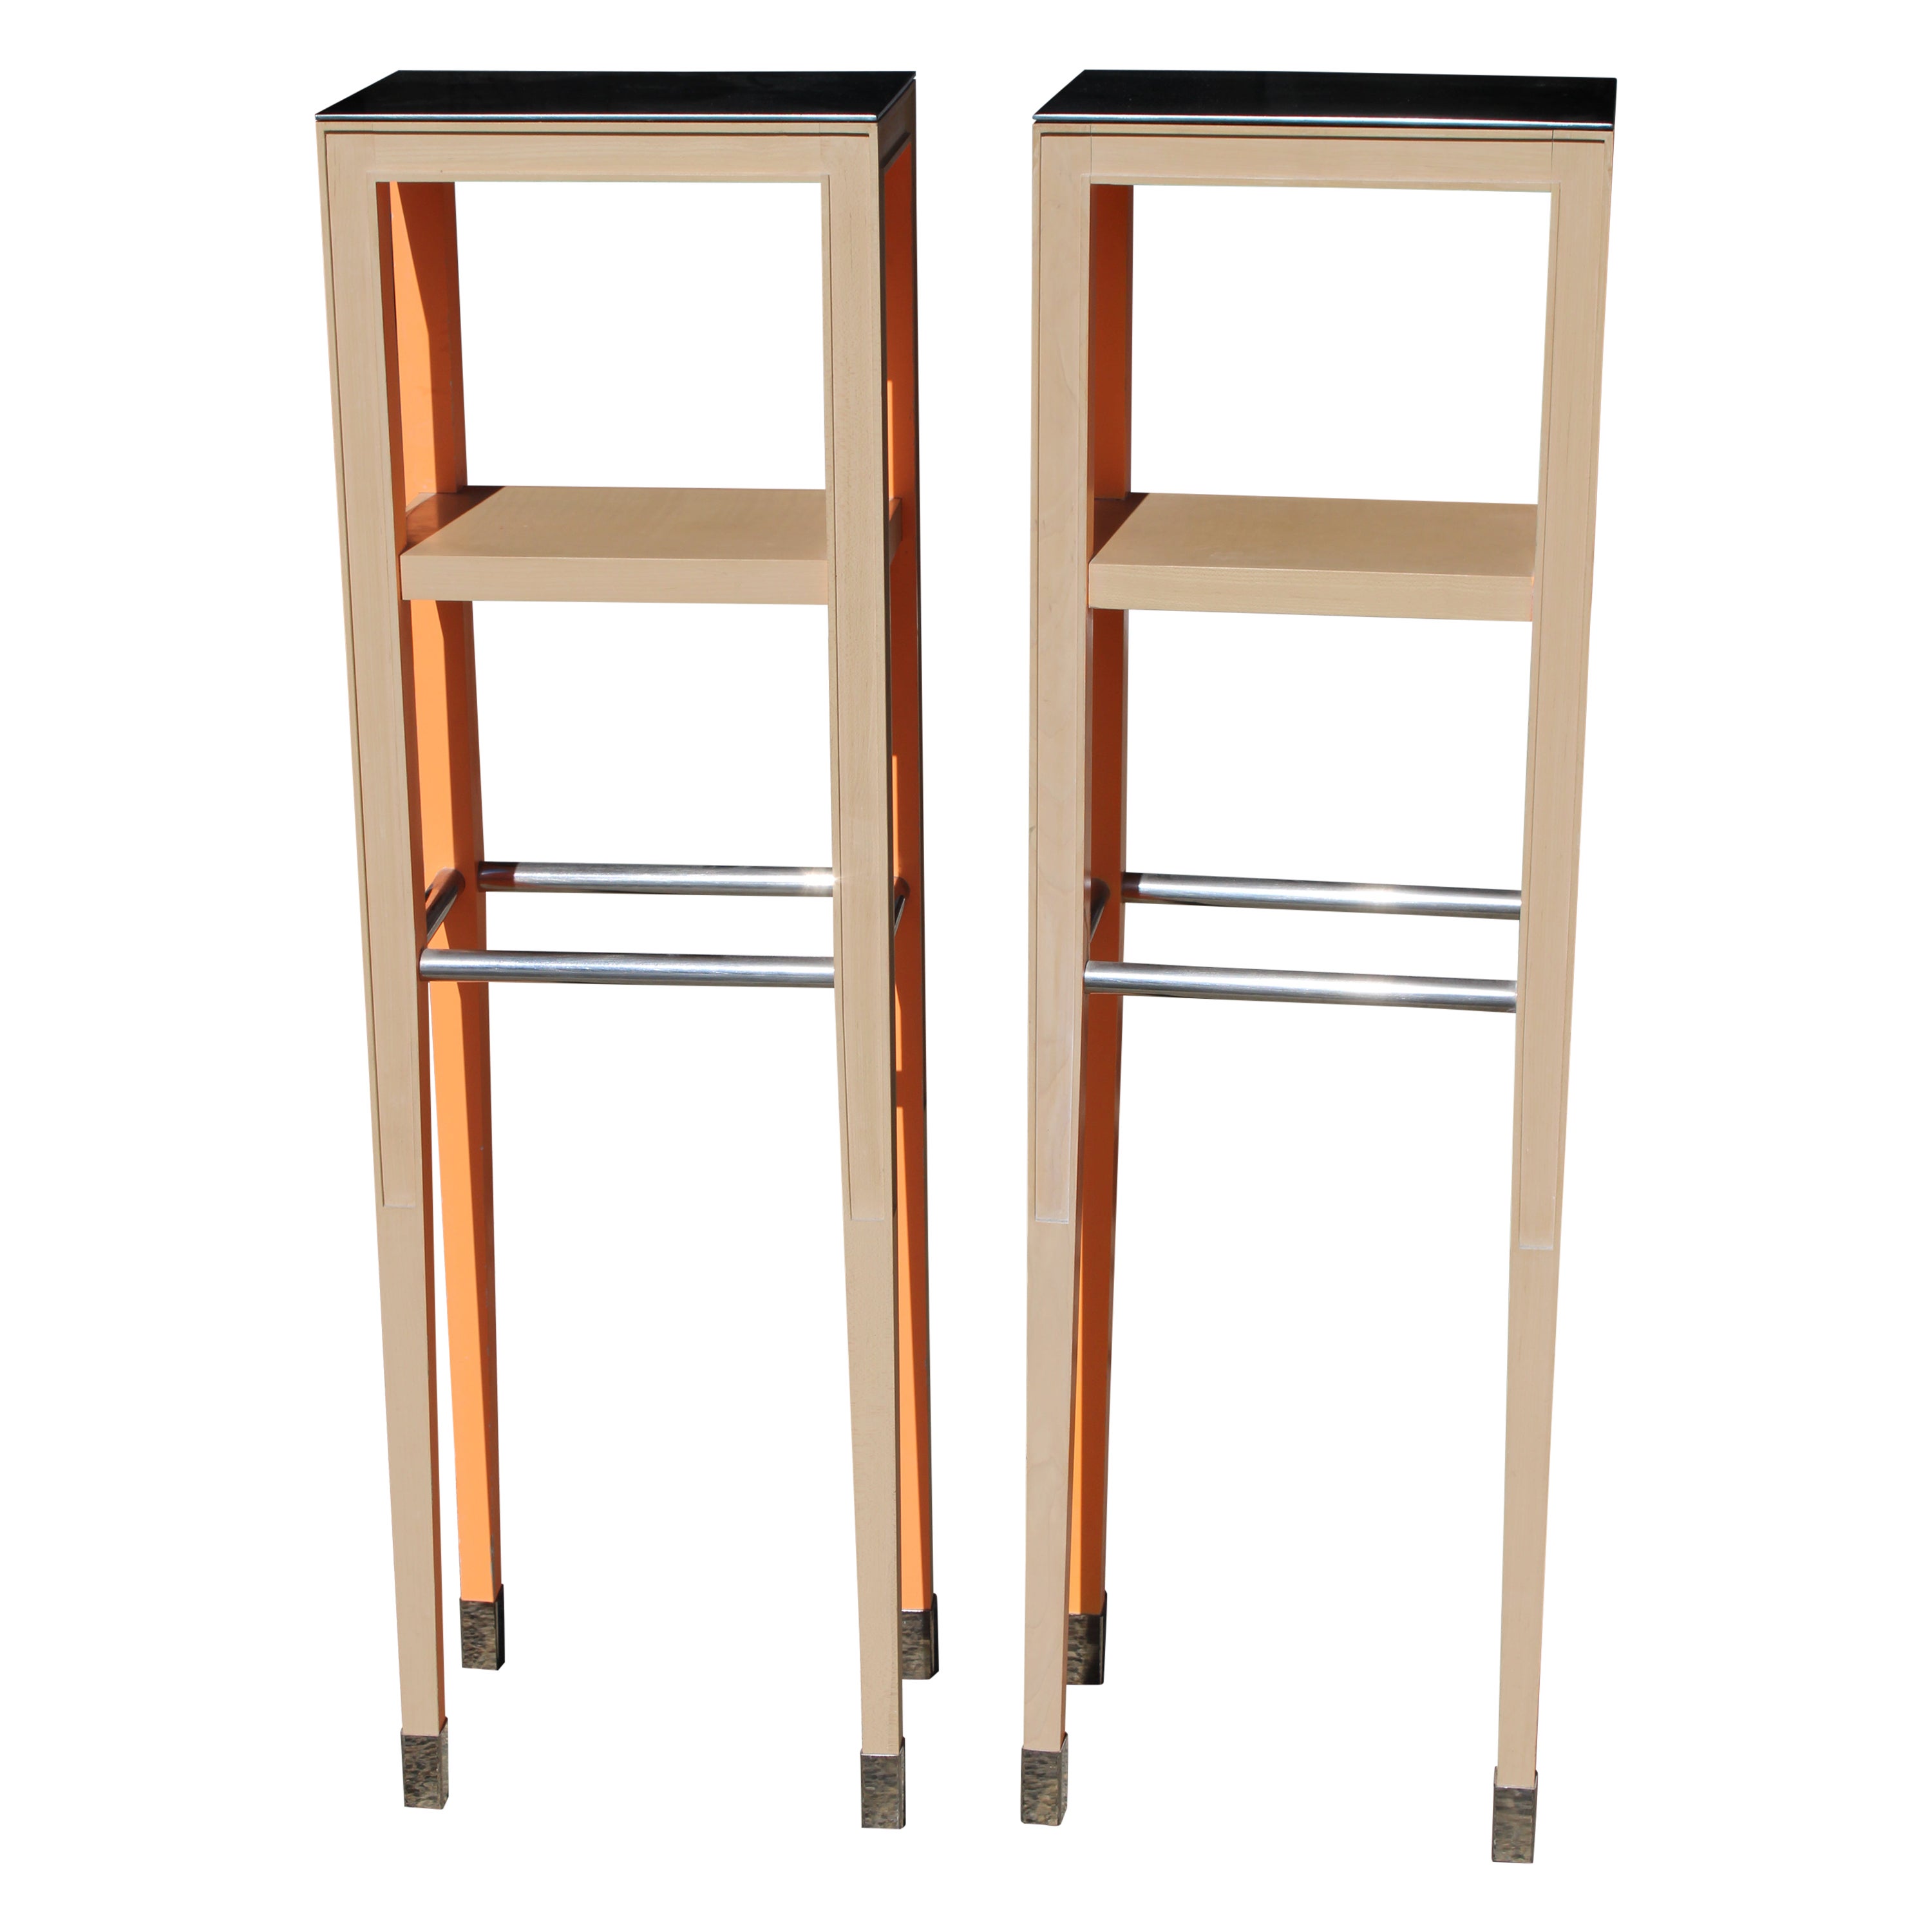 Pair of Pedestals by Philippe Starck for the Clift Hotel, San Francisco, CA.